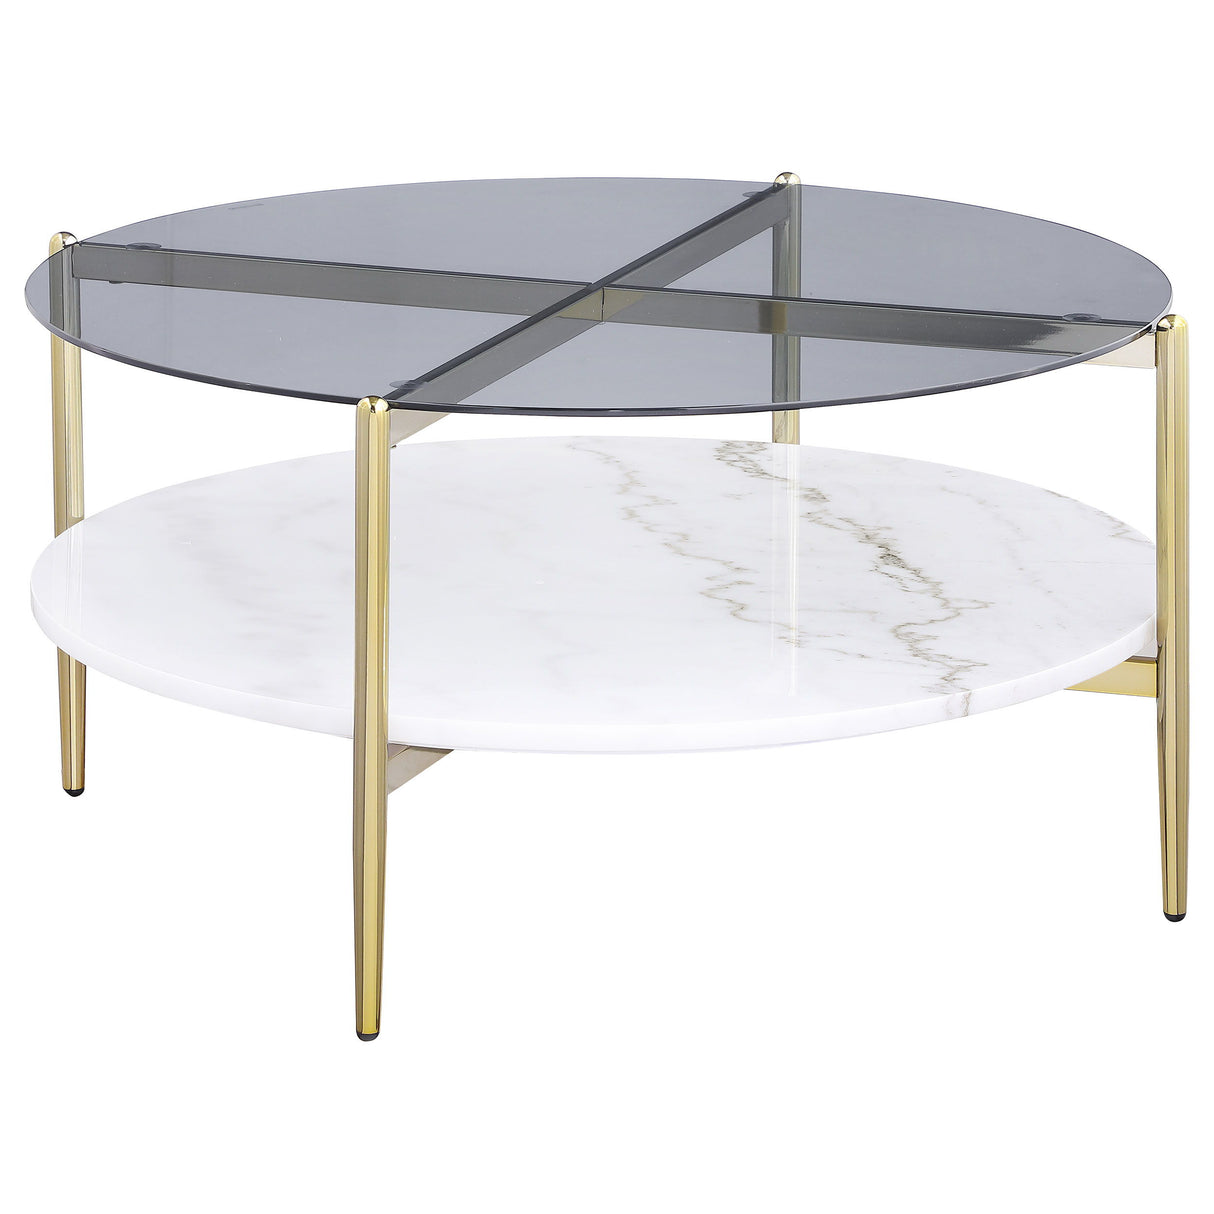 Jonelle - Round Glass Top Coffee Table Marble Shelf - Gold / White